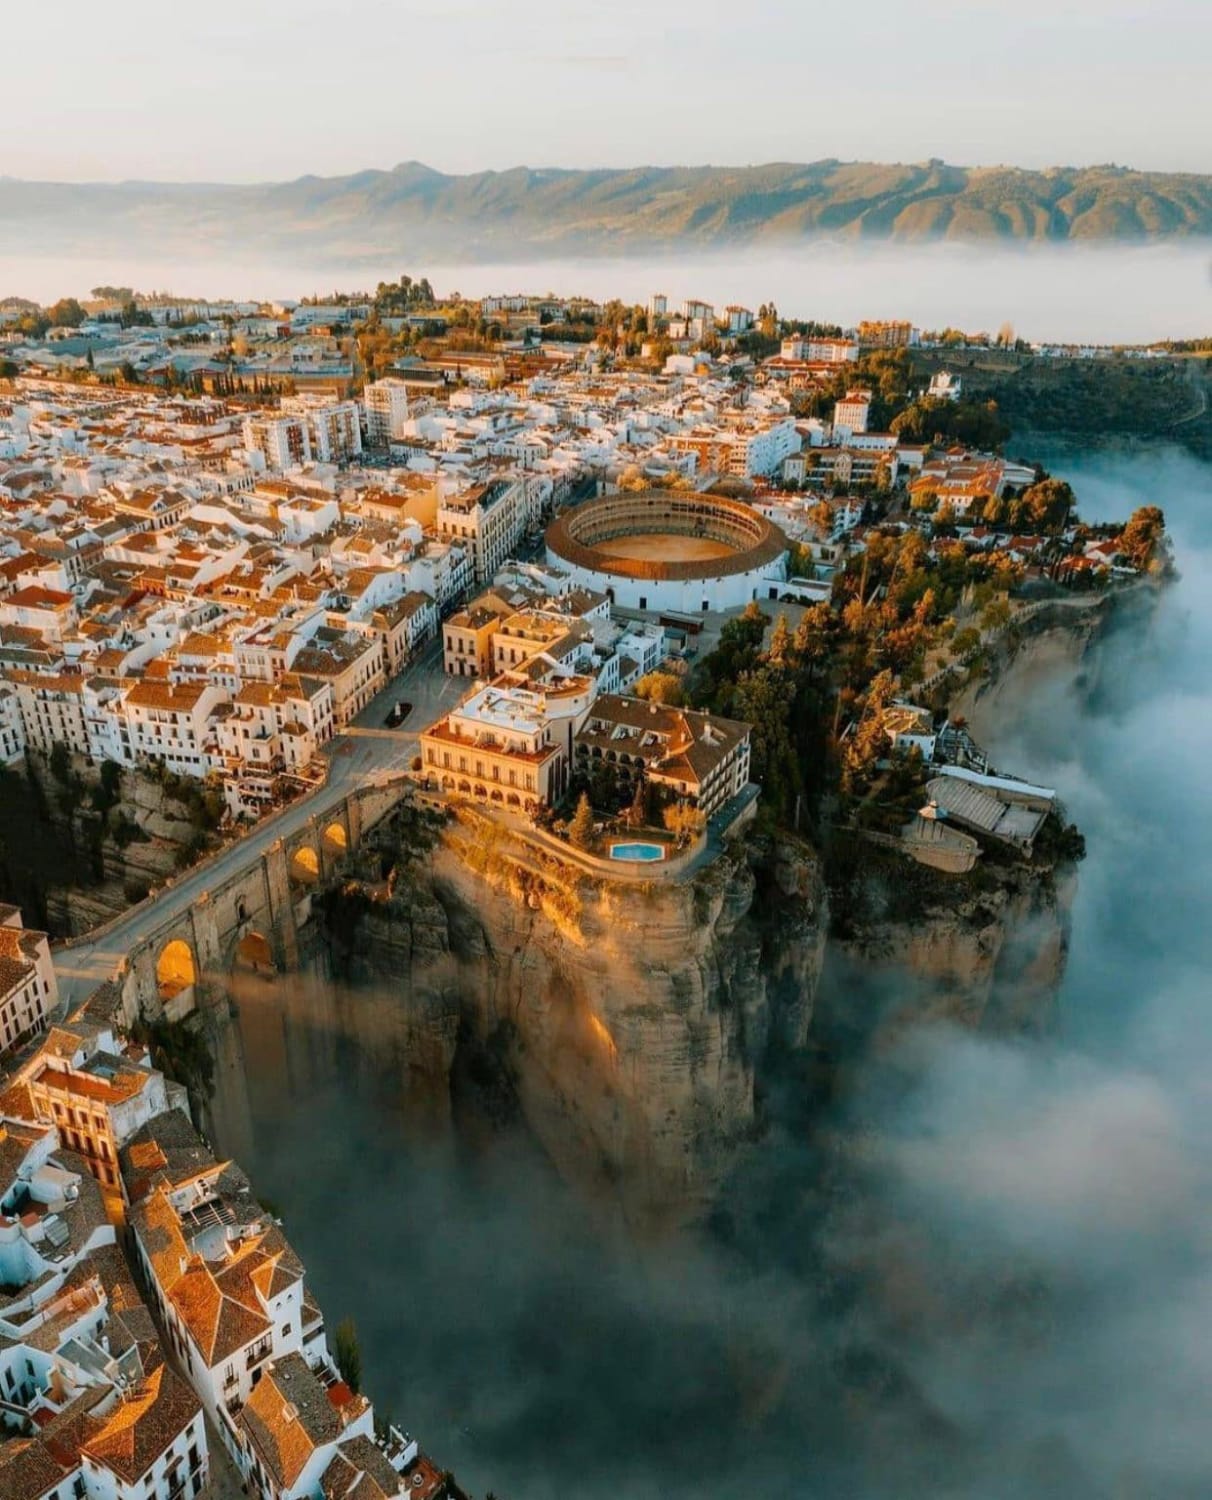 Ronda is a mountaintop city in Spain’s Malaga province that’s set dramatically above a deep gorge.